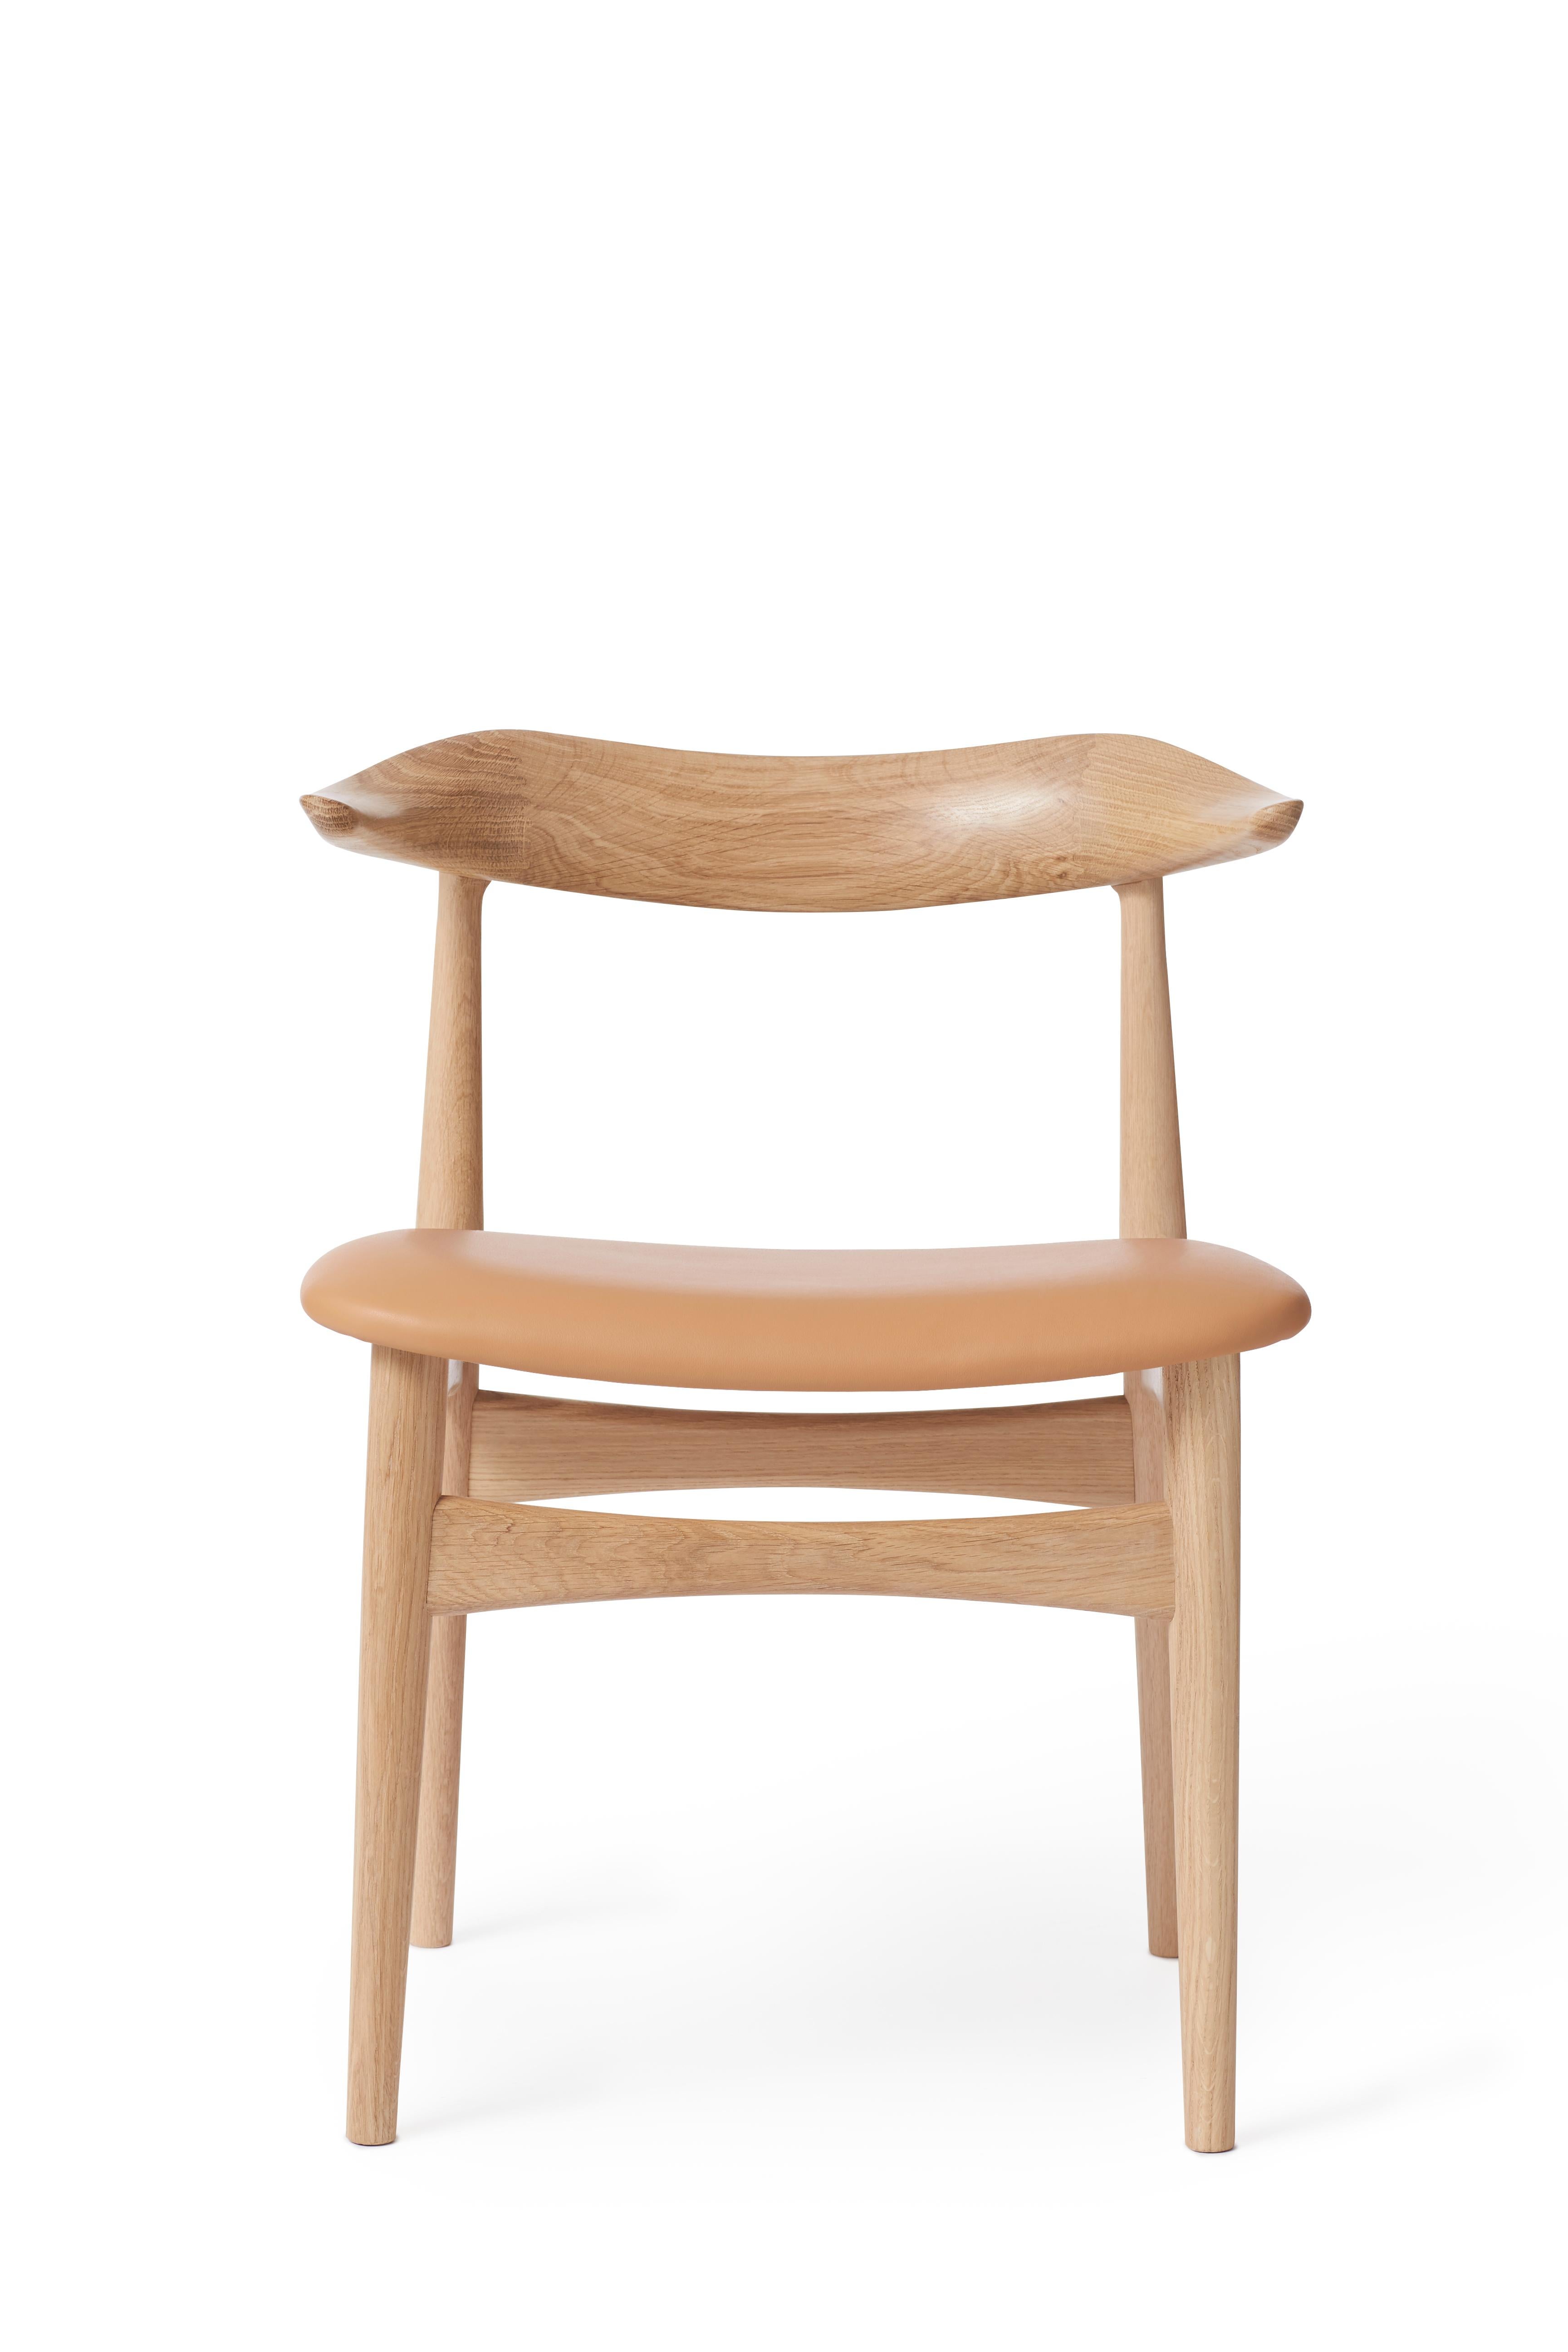 For Sale: Pink (Soavé) Cow Horn Oak Chair, by Knud Færch from Warm Nordic